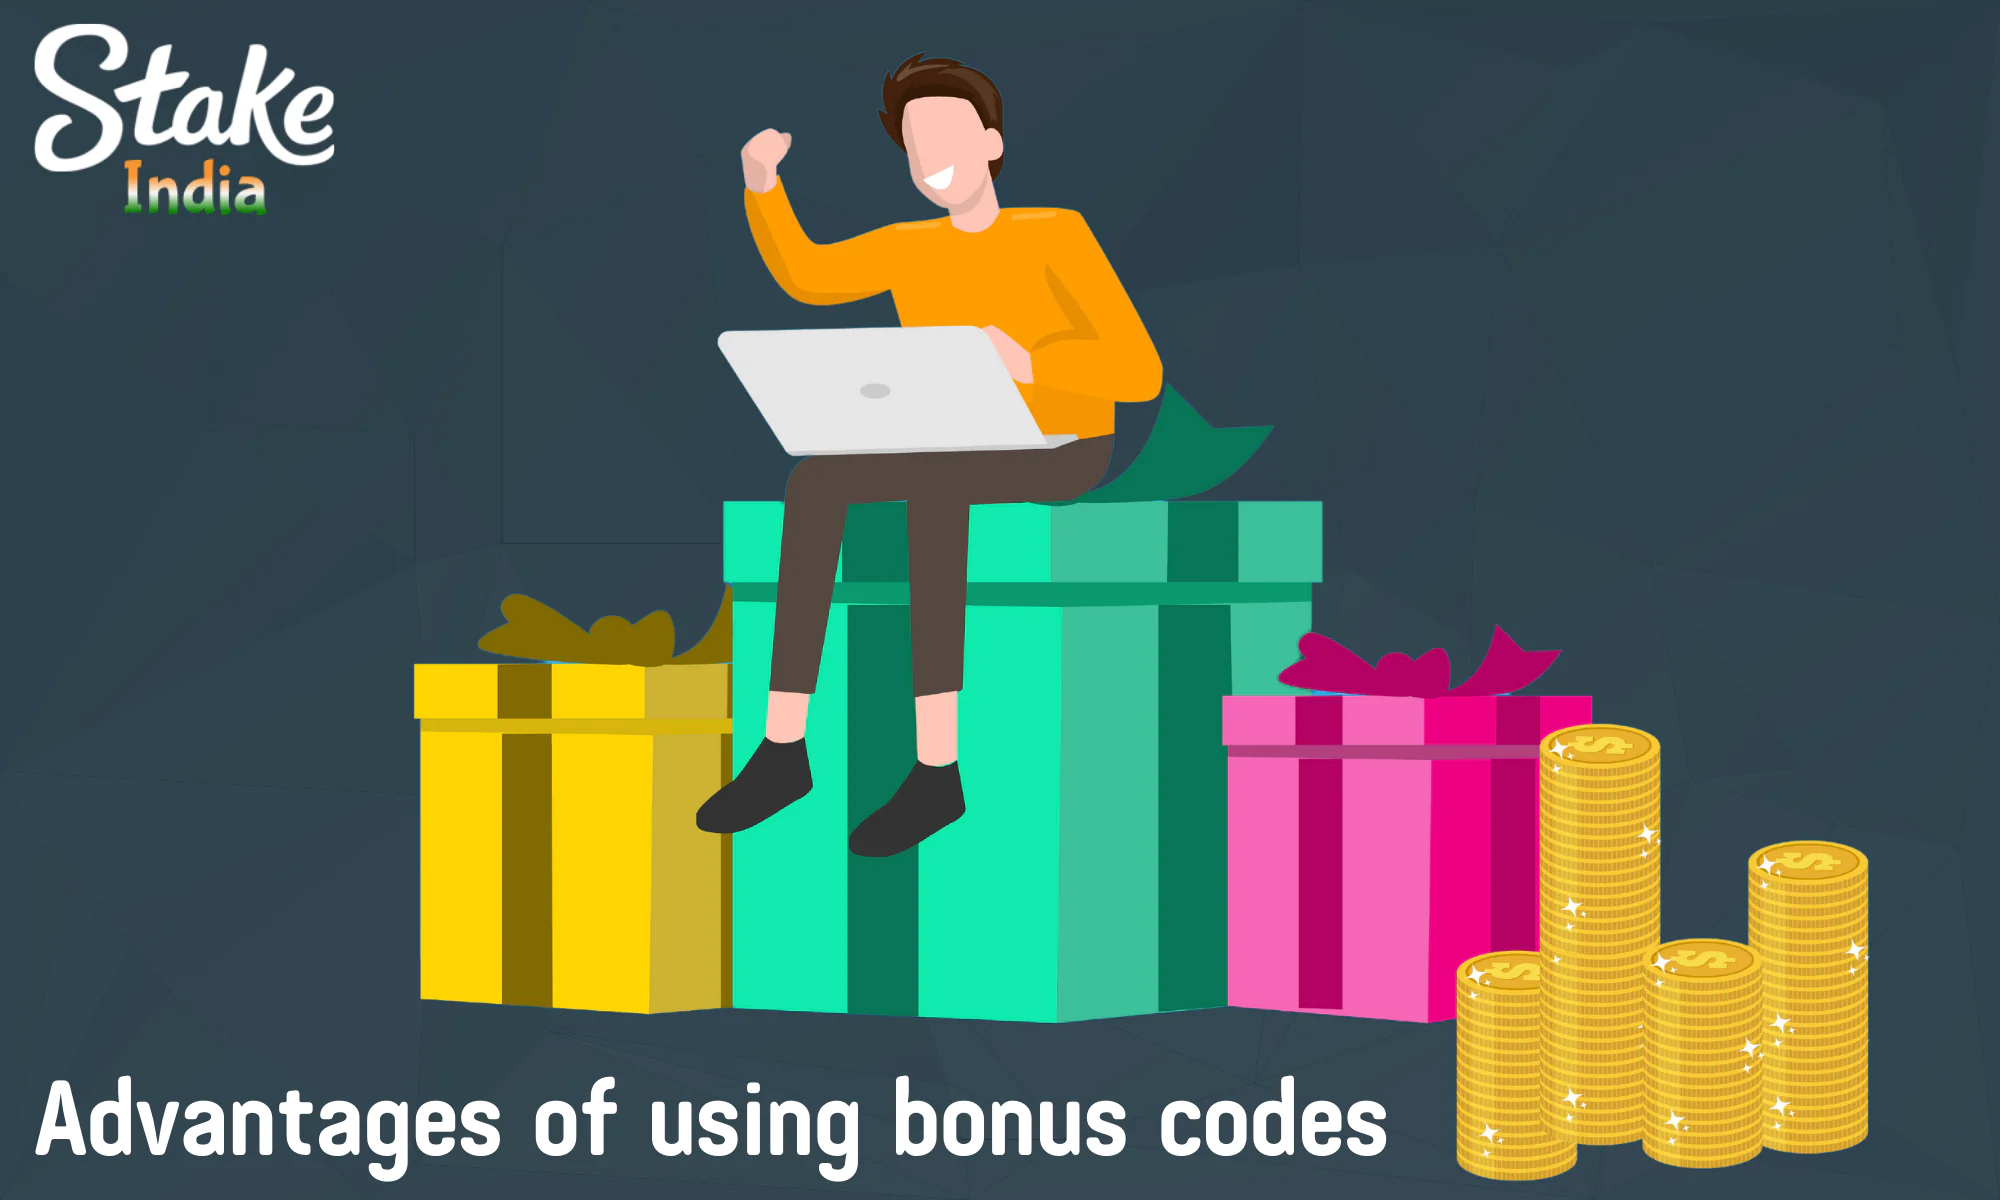 The list of benefits you get when using bonus codes at Stake